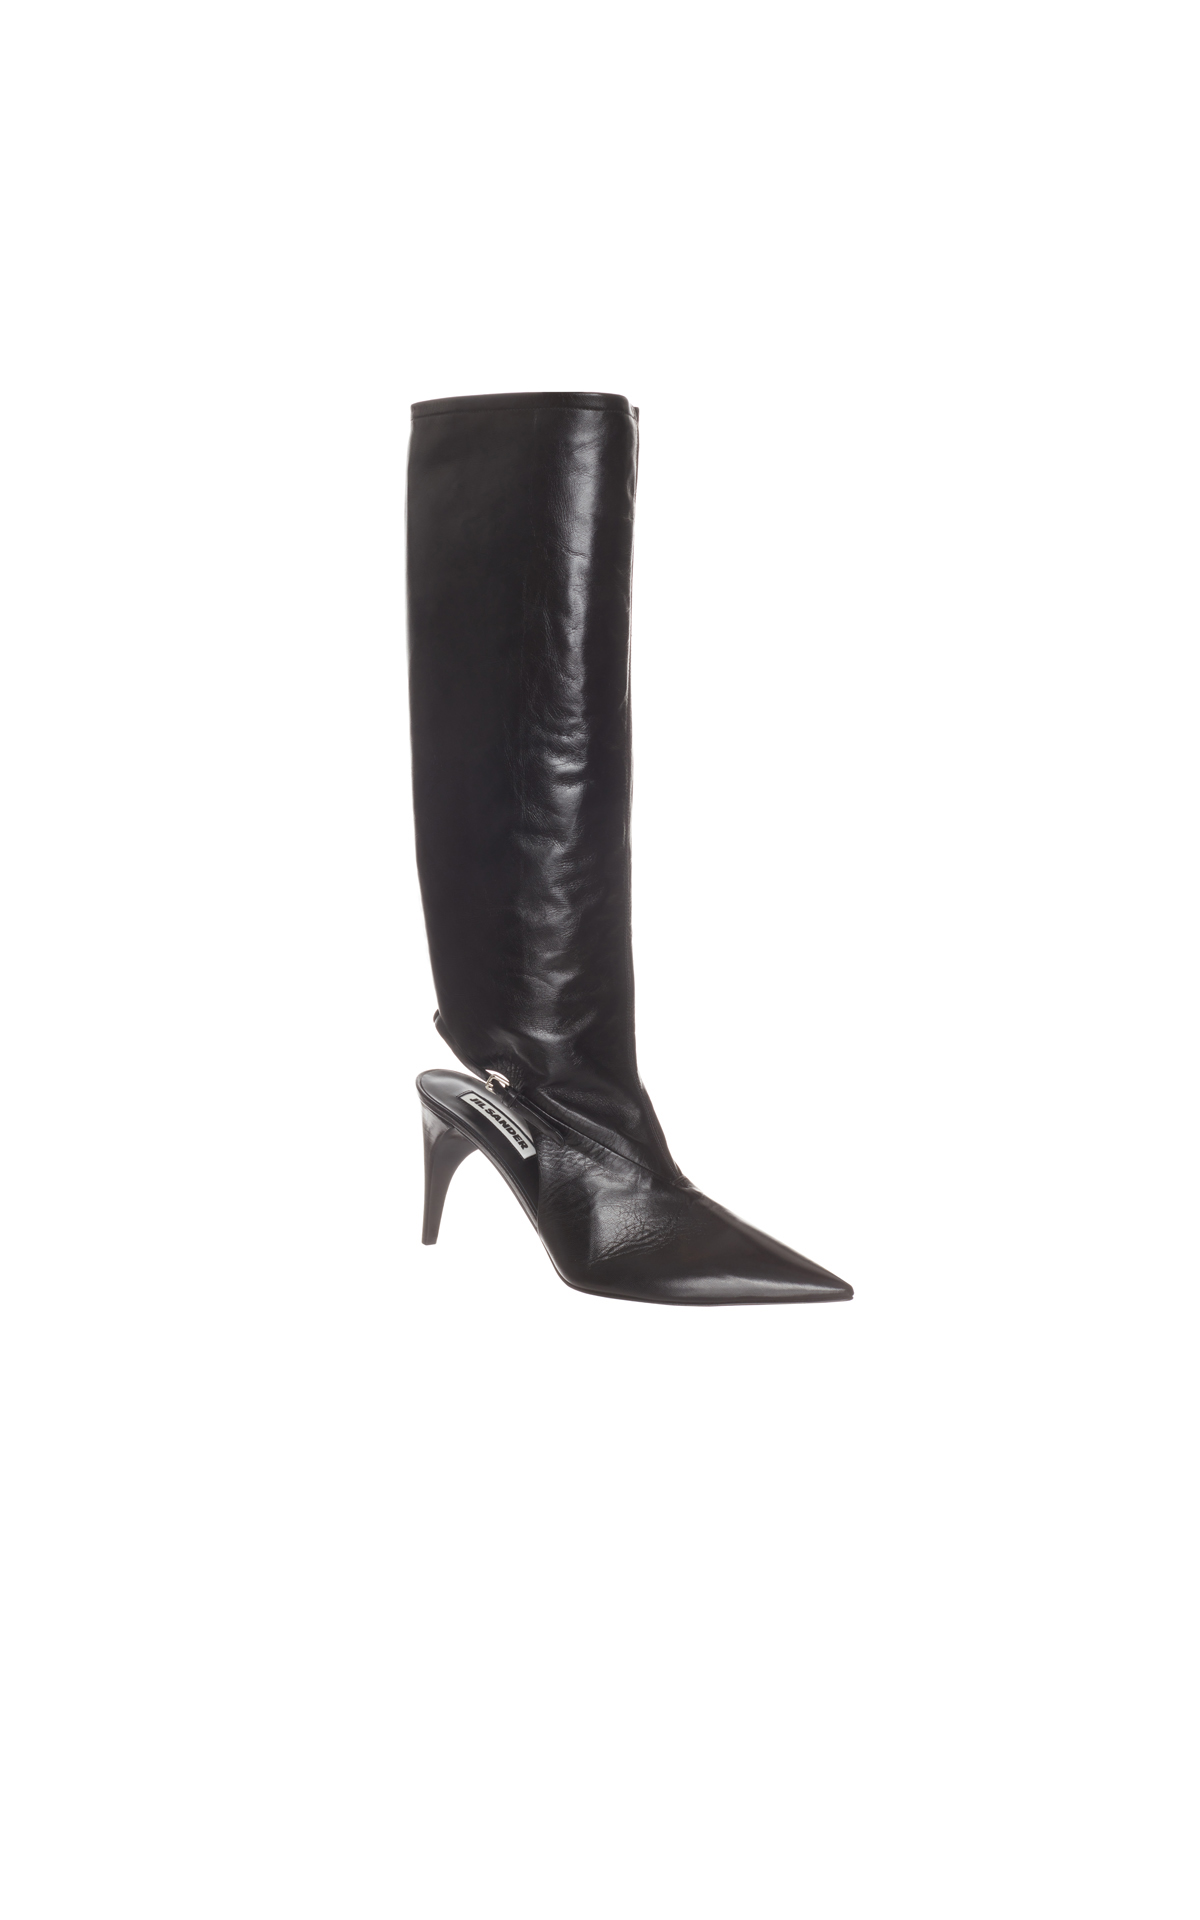 Jil Sander Leather knee high boots from Bicester Village